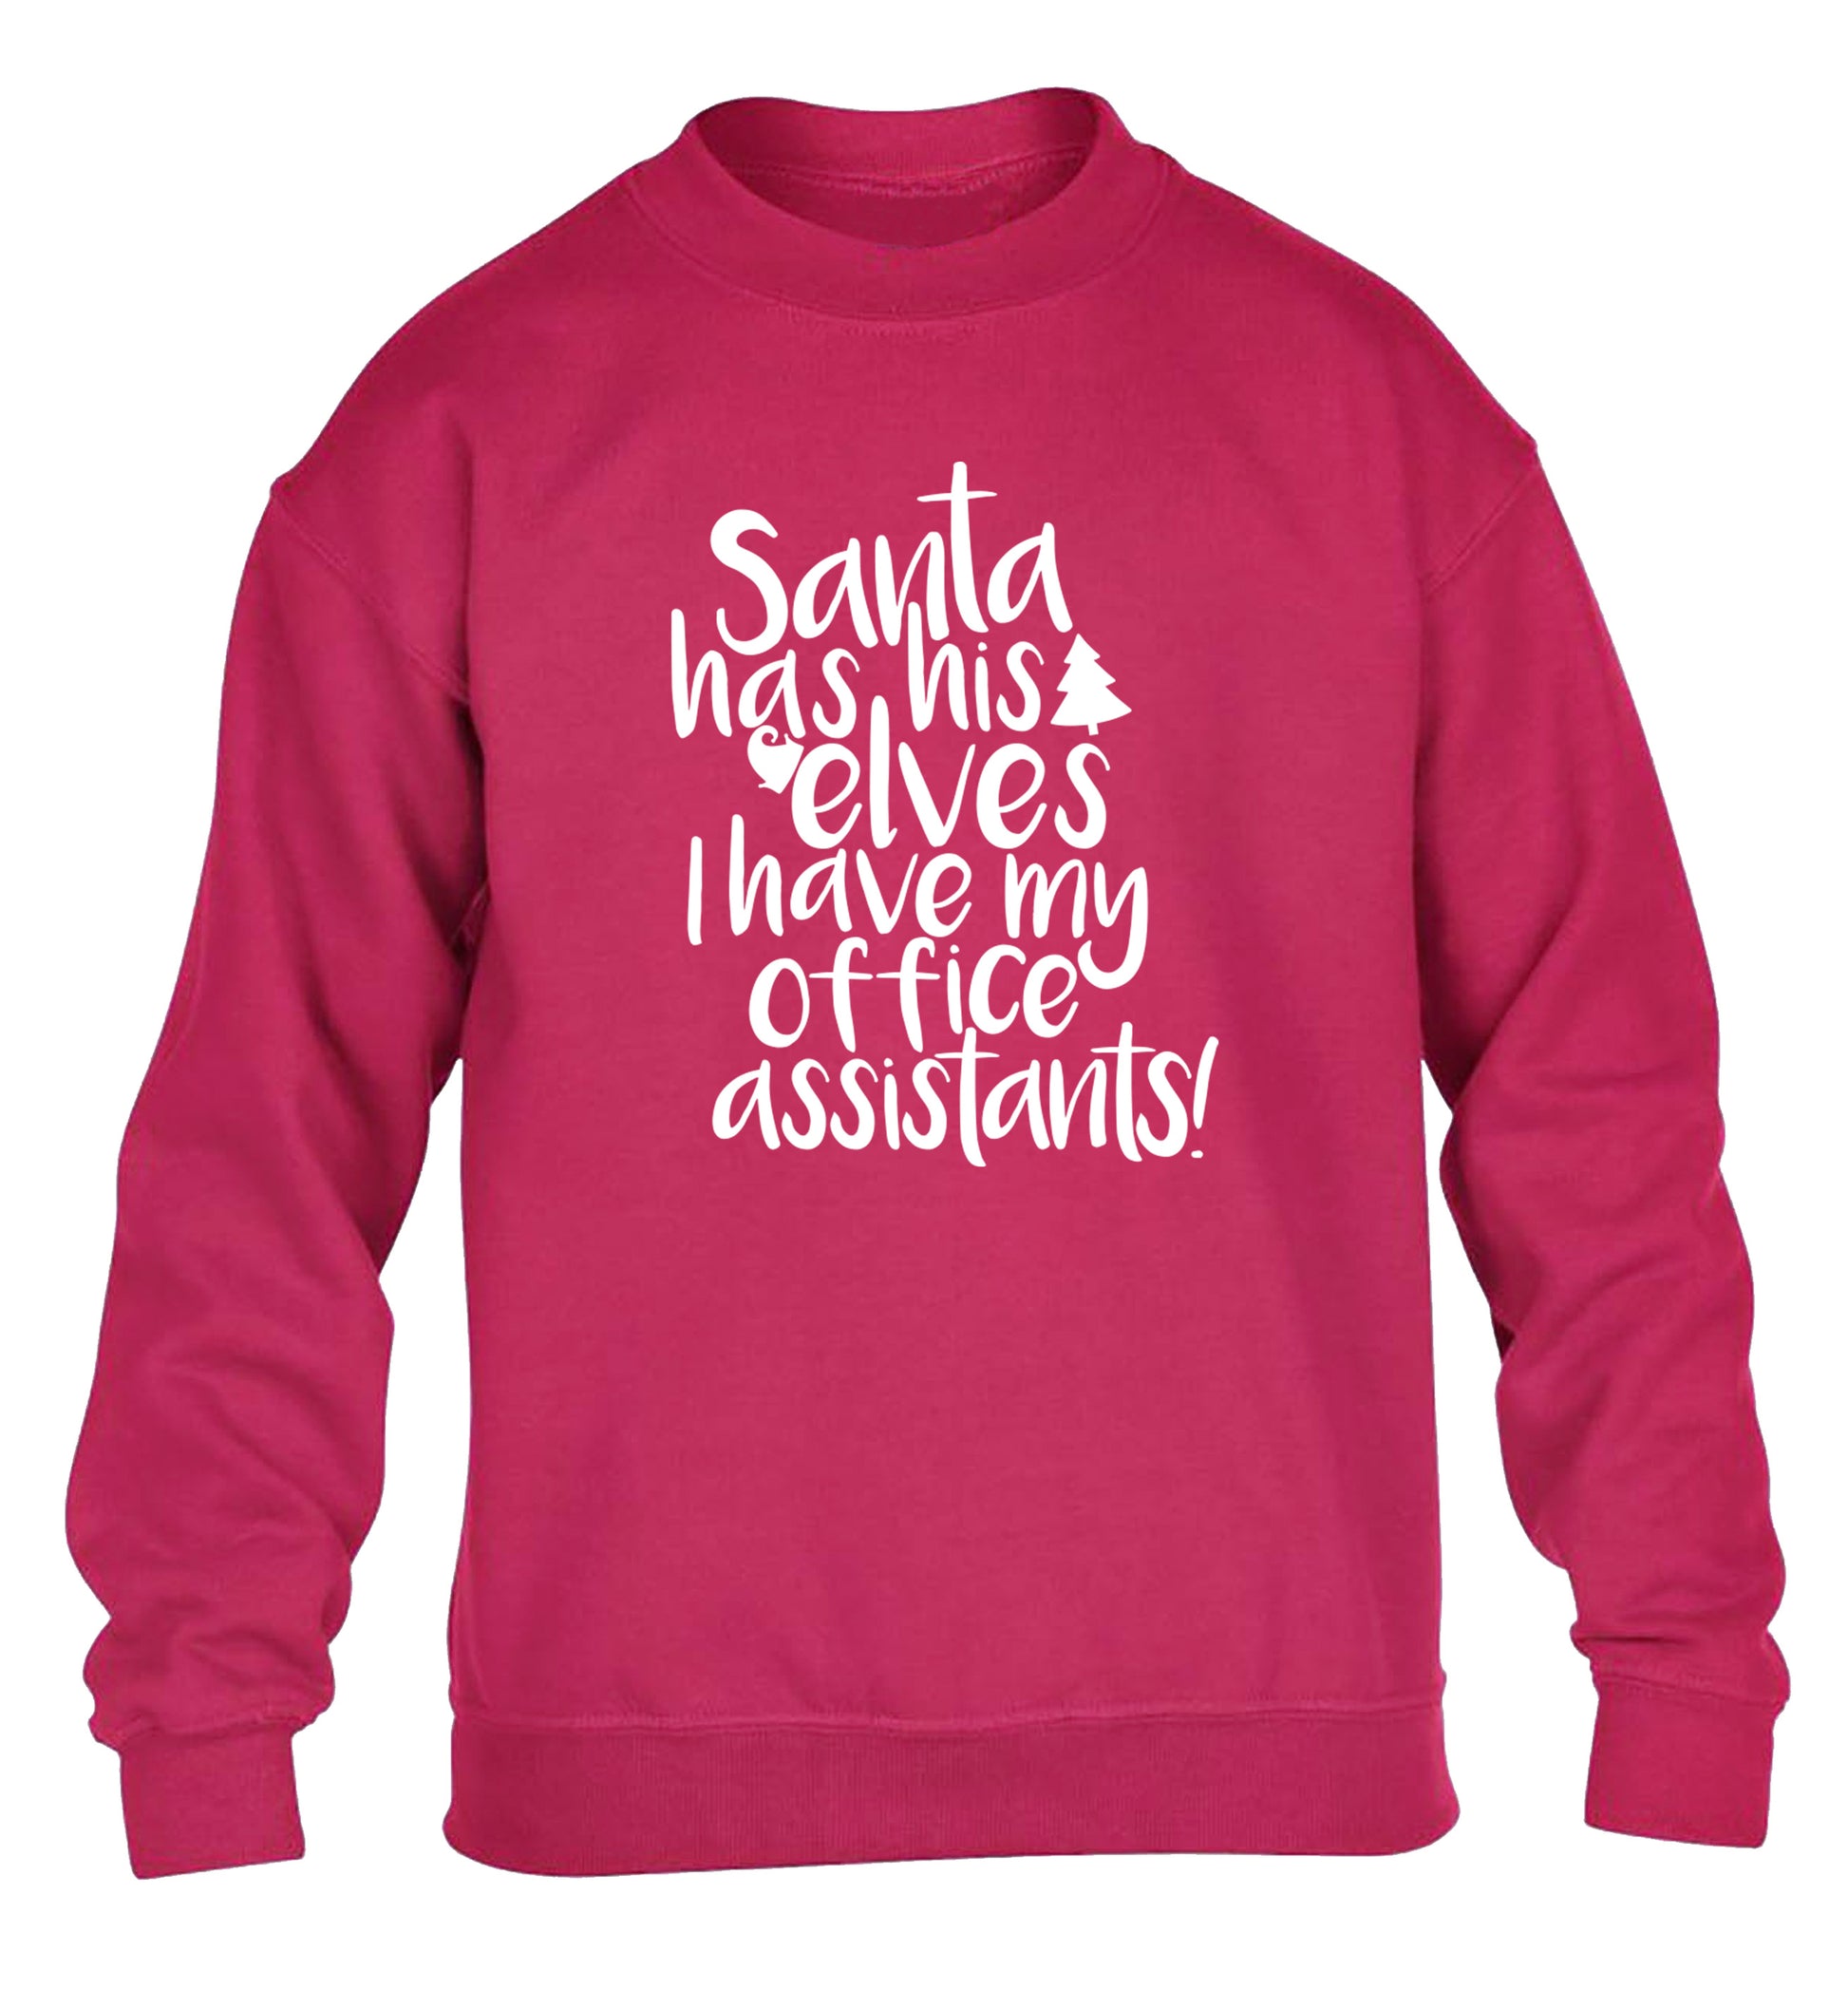 Santa has elves I have office assistants children's pink sweater 12-13 Years